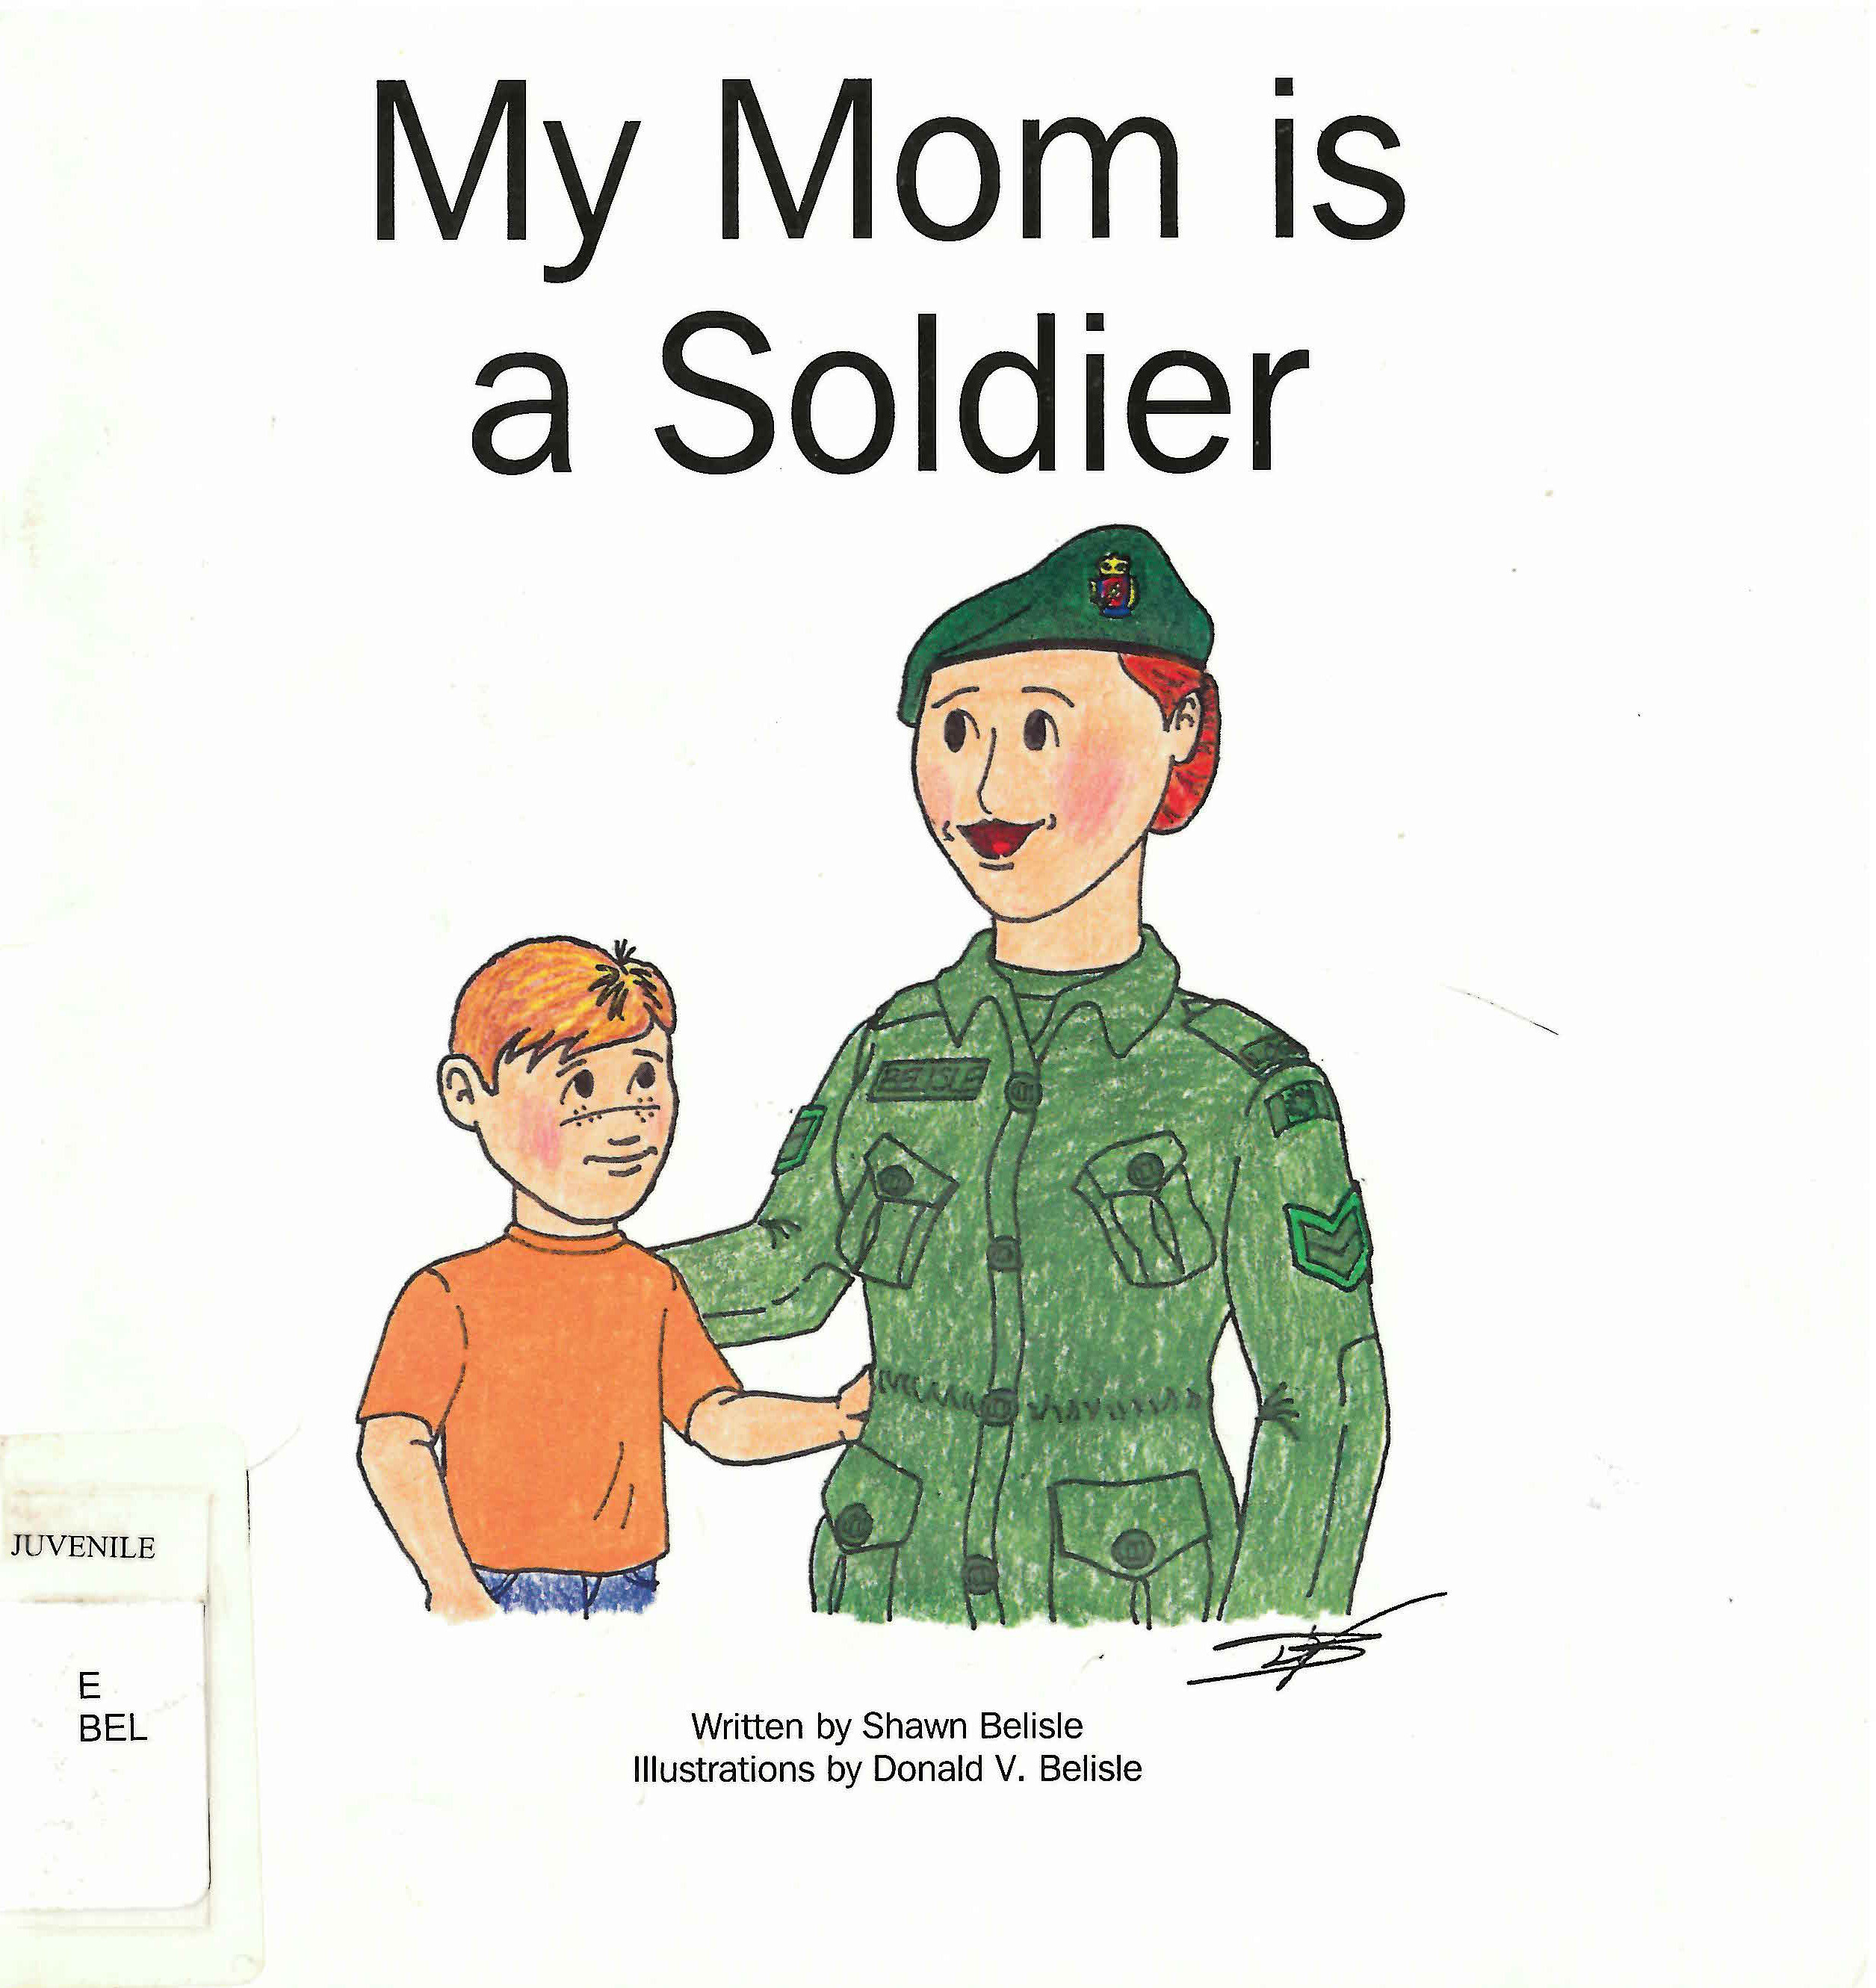 My mom is a soldier